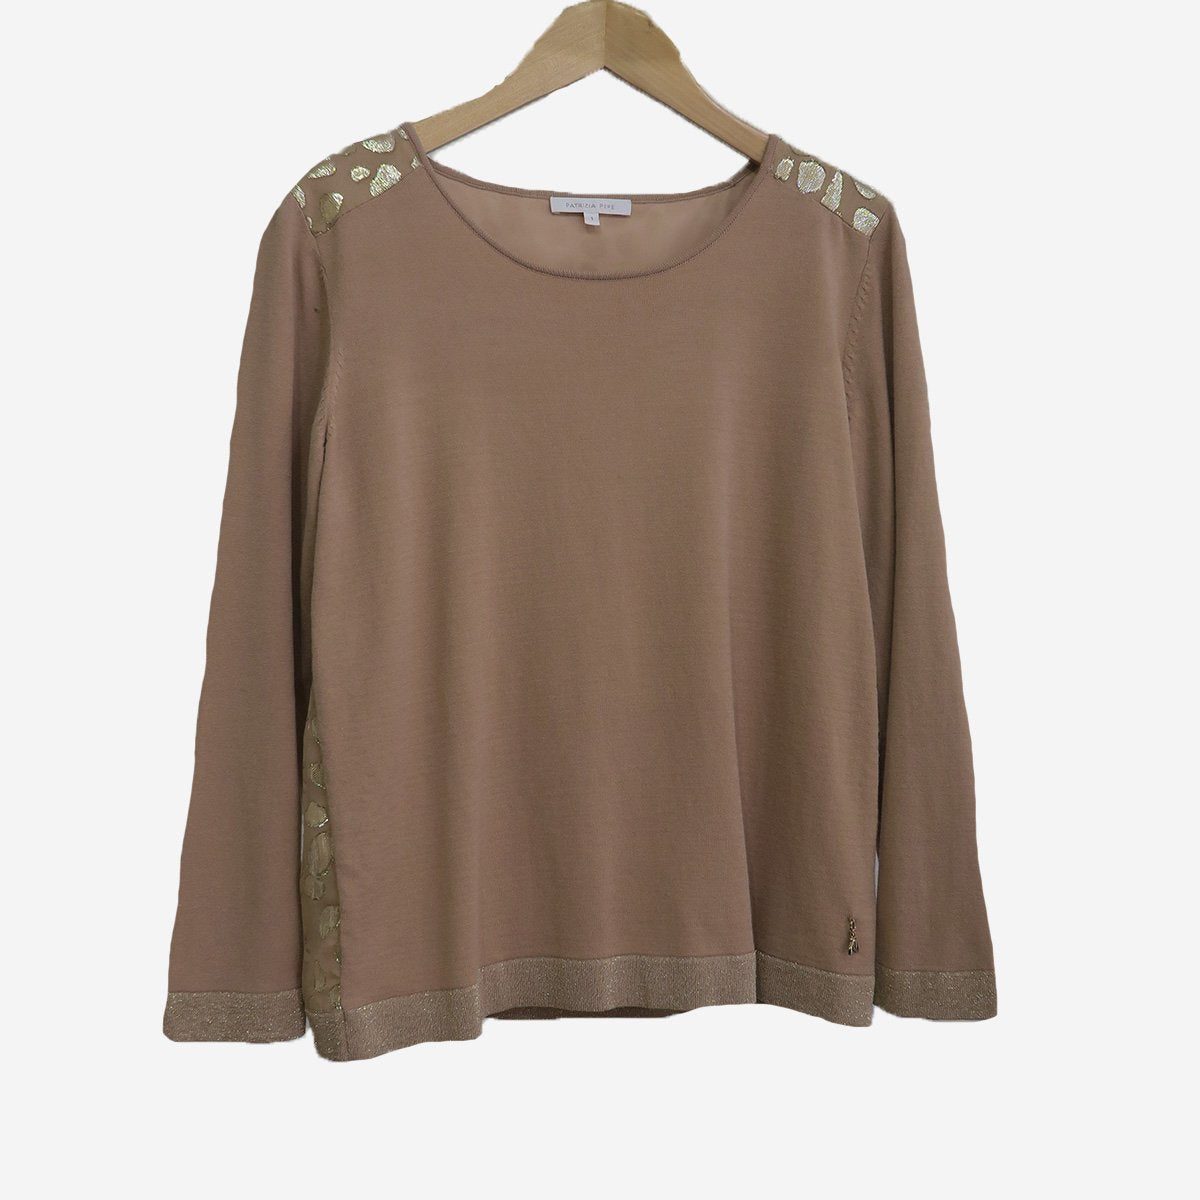 ROUND NECK KNIT WITH GOLD BACK